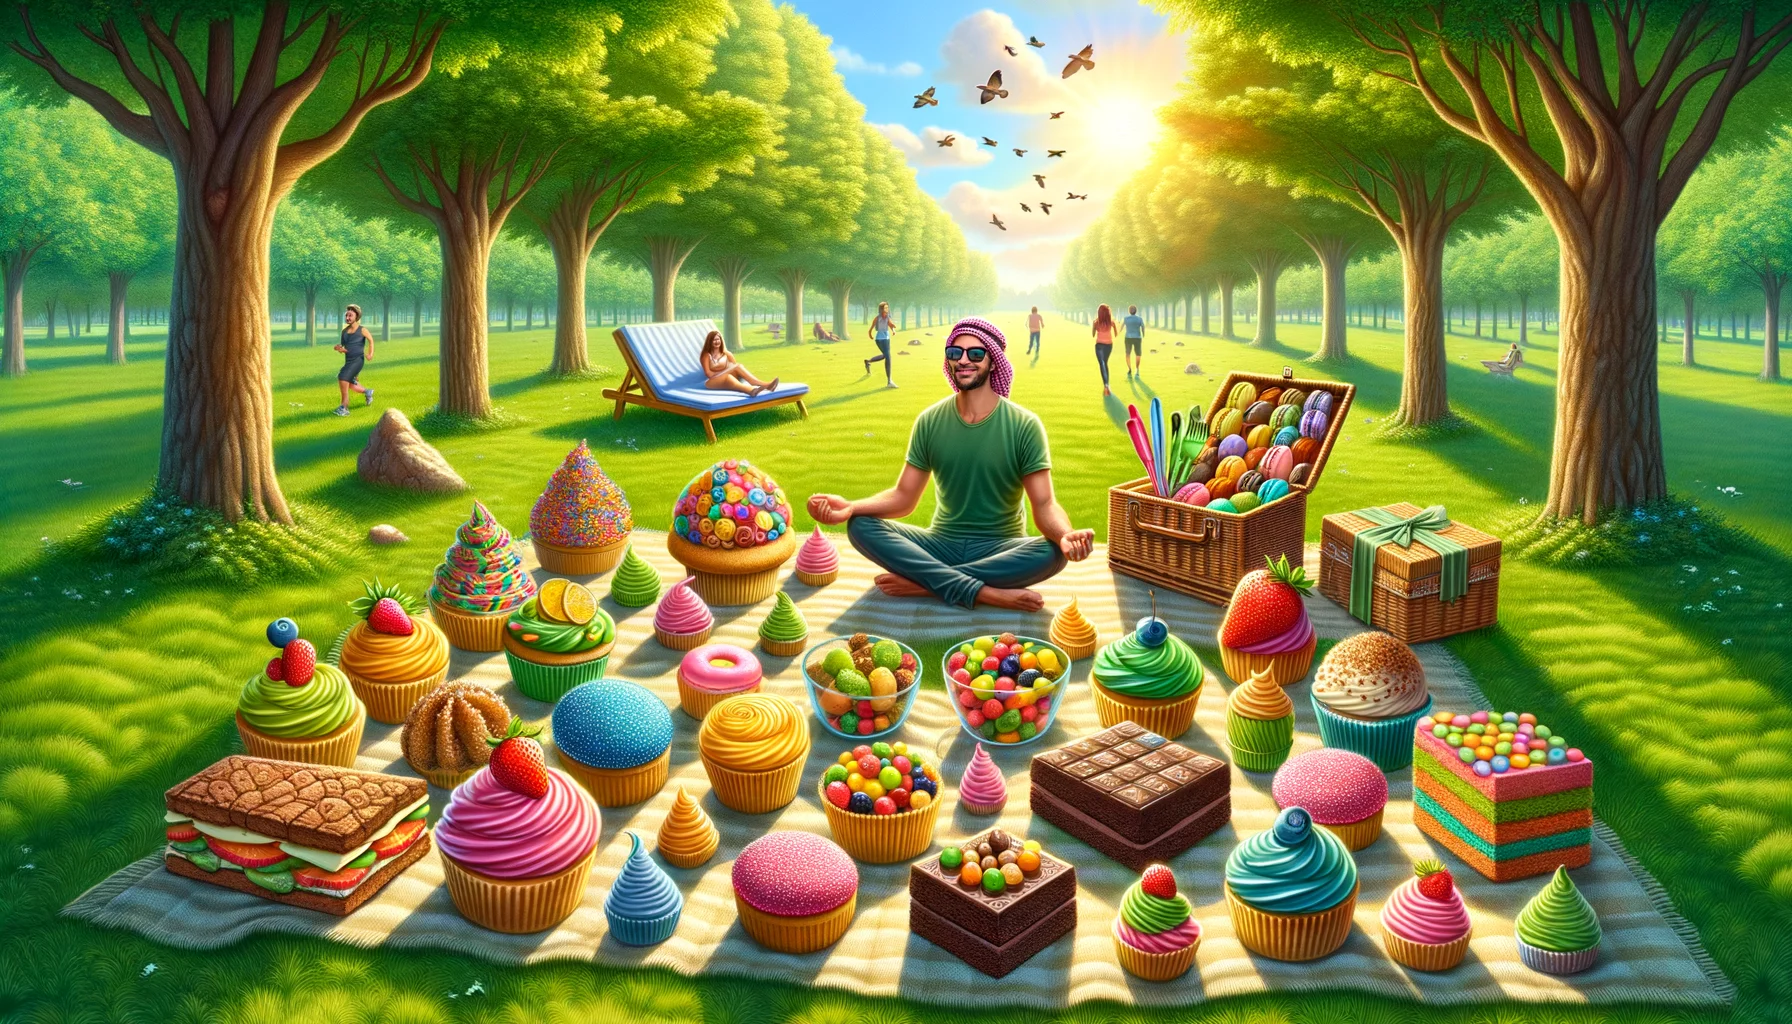 Create a humorous and astoundingly realistic image depicting an ideal setting for enjoying vegan sweets. Picture a lush green park on a bright, sunny afternoon. There could be a picnic blanket laid out on the greenery, with an array of brightly hued, mouthwatering vegan sweets carefully arranged. Include delectable vegan cupcakes, dazzling pastel-colored macaroons, exotic fruit drags, and dark chocolate vegan brownies. In the background, trees are rustling with the gentle breeze, birds are chirping cheerfully, and far away, a group of people, a Middle Eastern man and a Hispanic woman can be seen jogging.